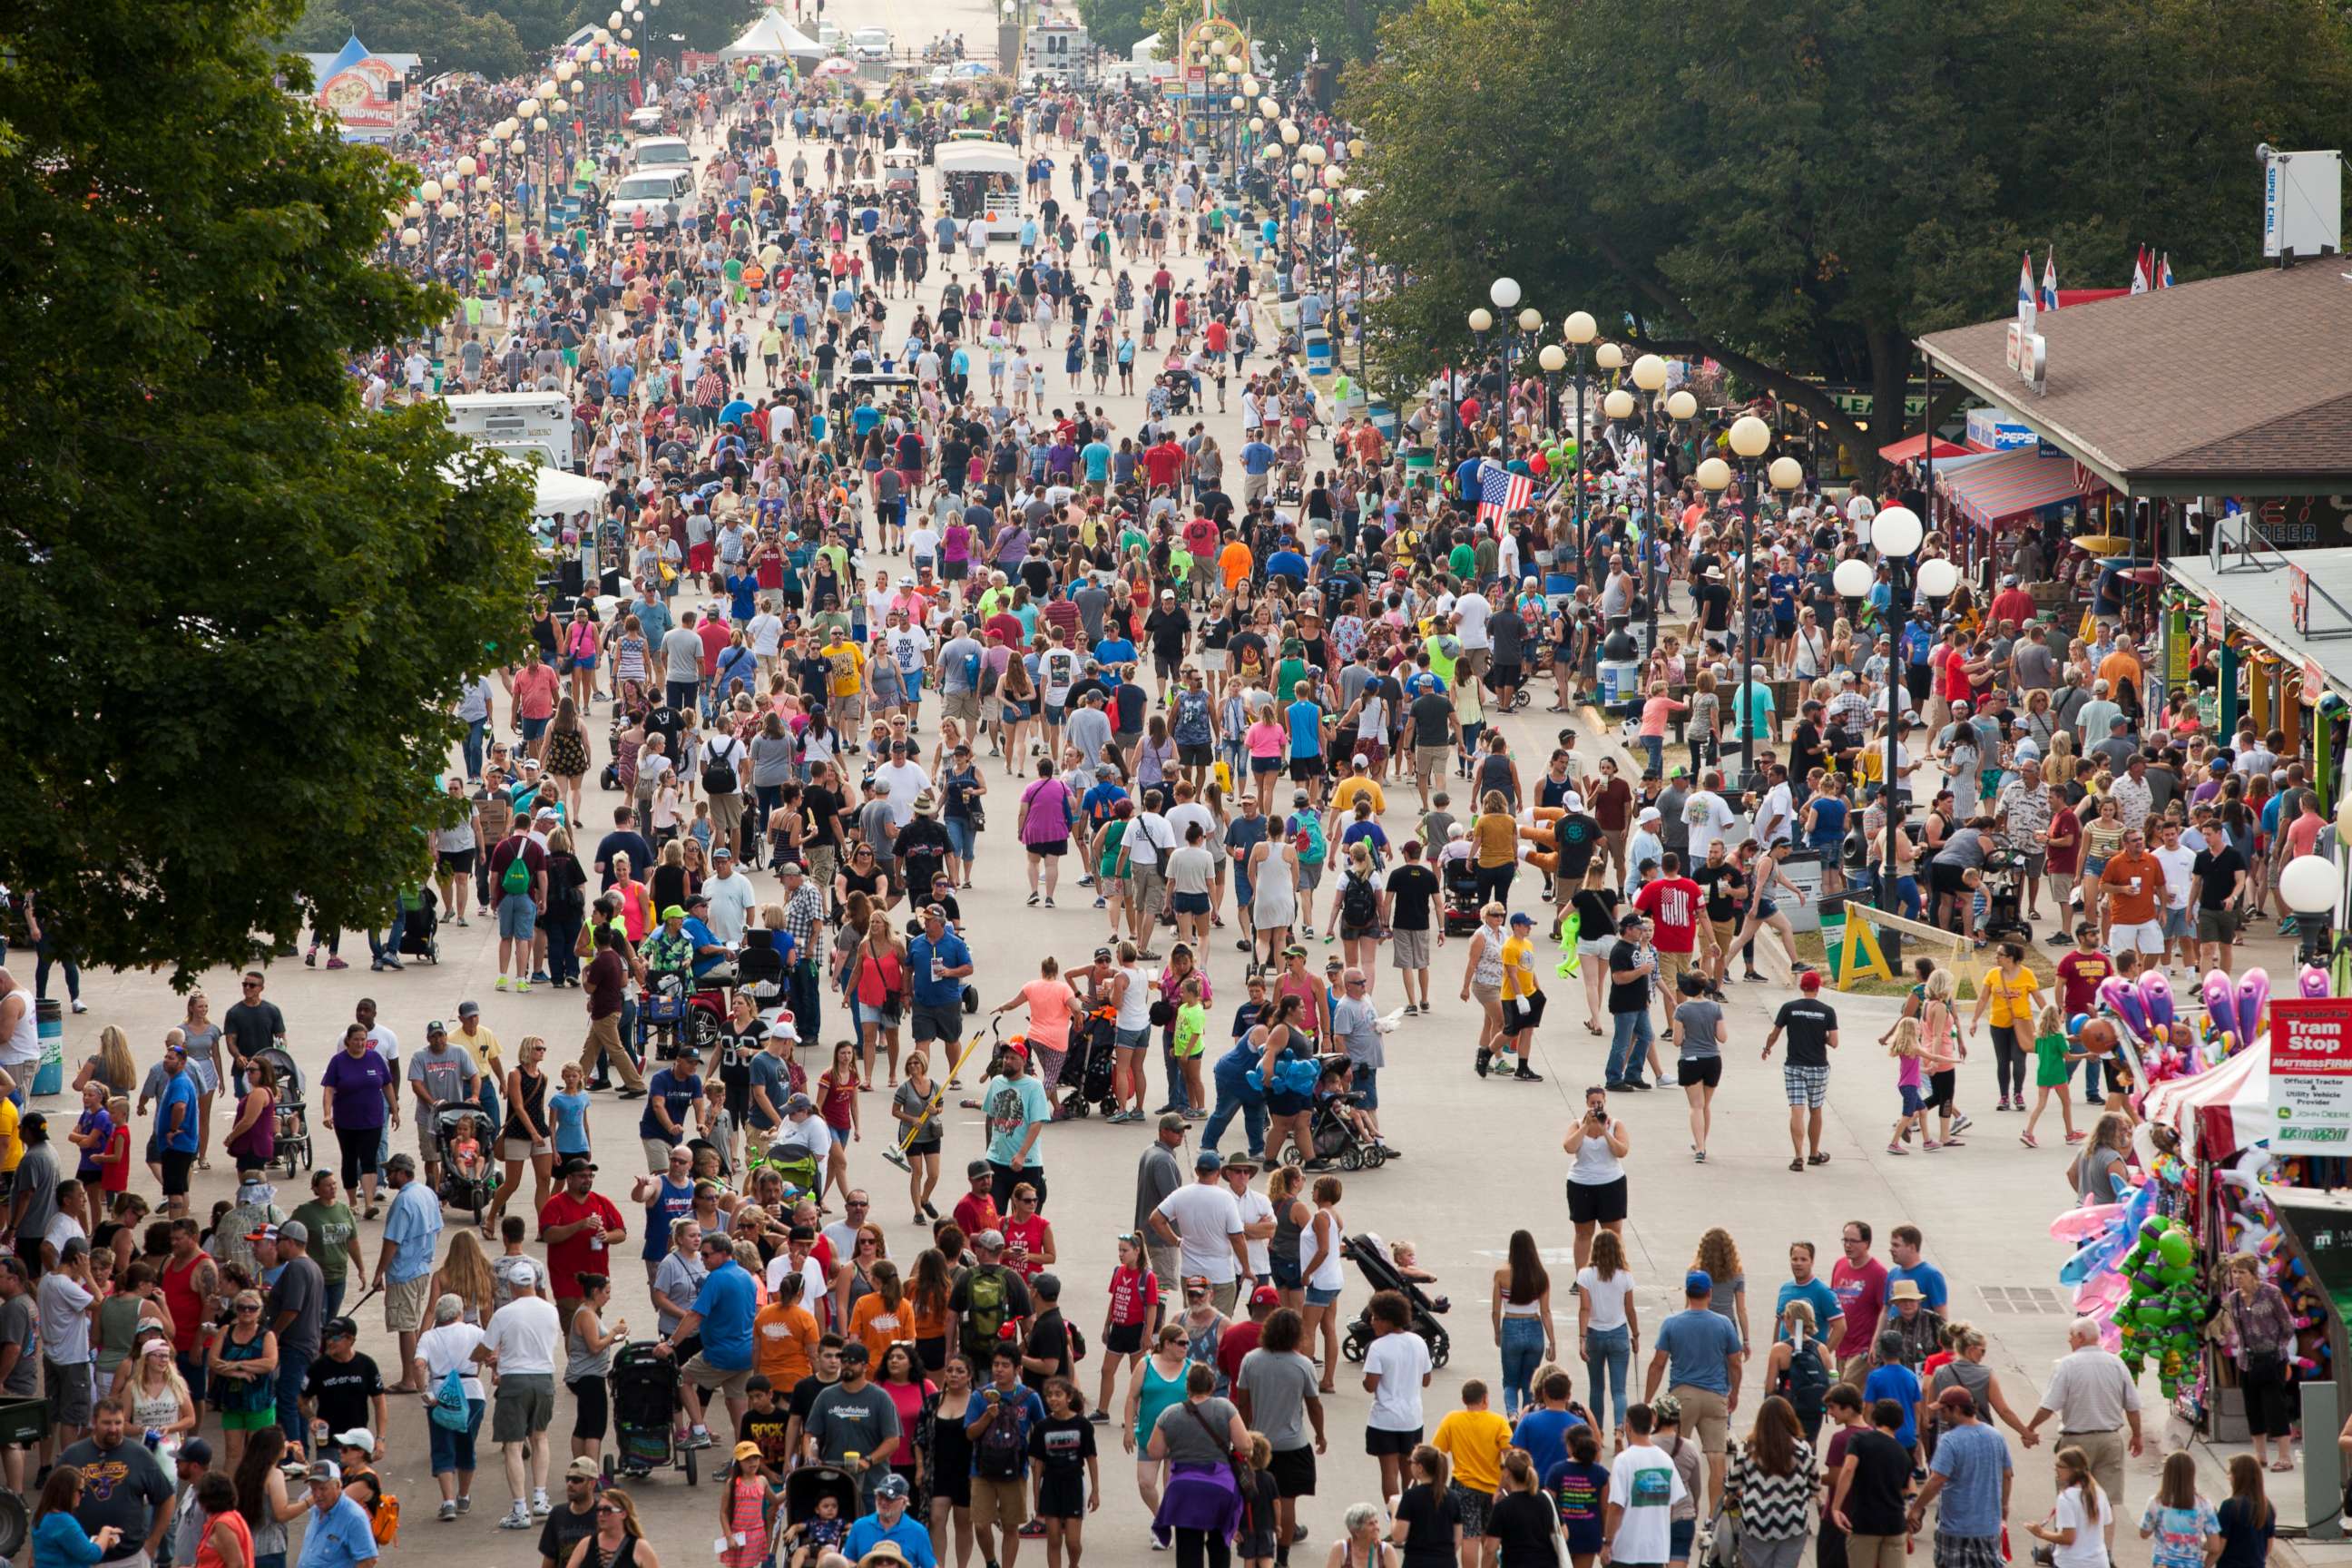 PHOTO: The Grand Concourse is crowded with visitors at the Iowa State Fair, on Aug. 18, 2018, in Des Moines, Iowa.